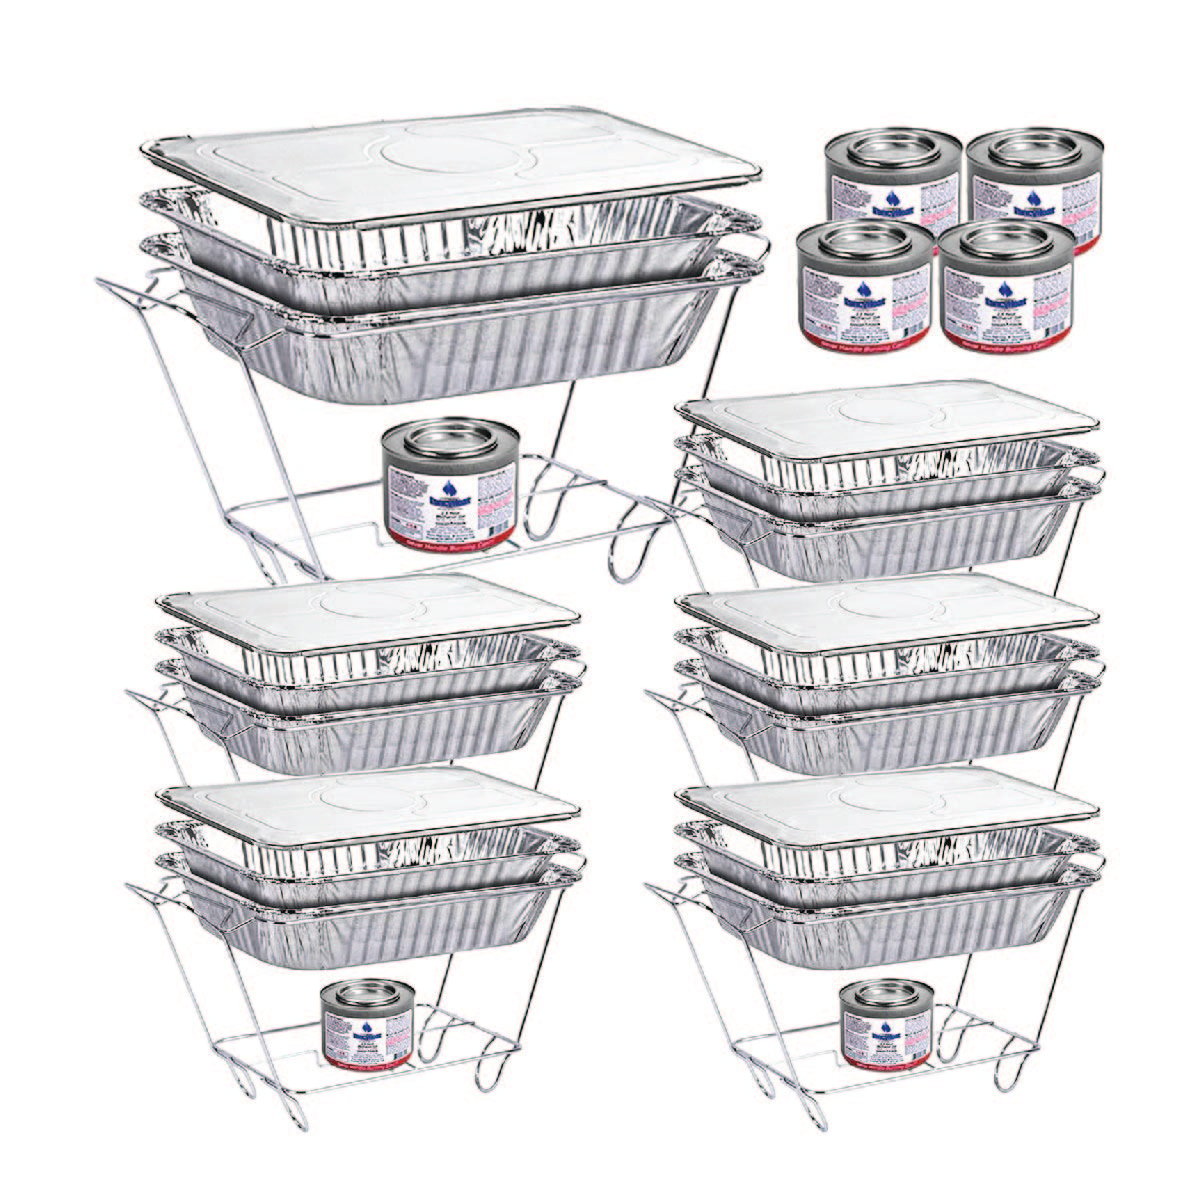 Disposable aluminum baking pans with stands, lids and fuel pans. 